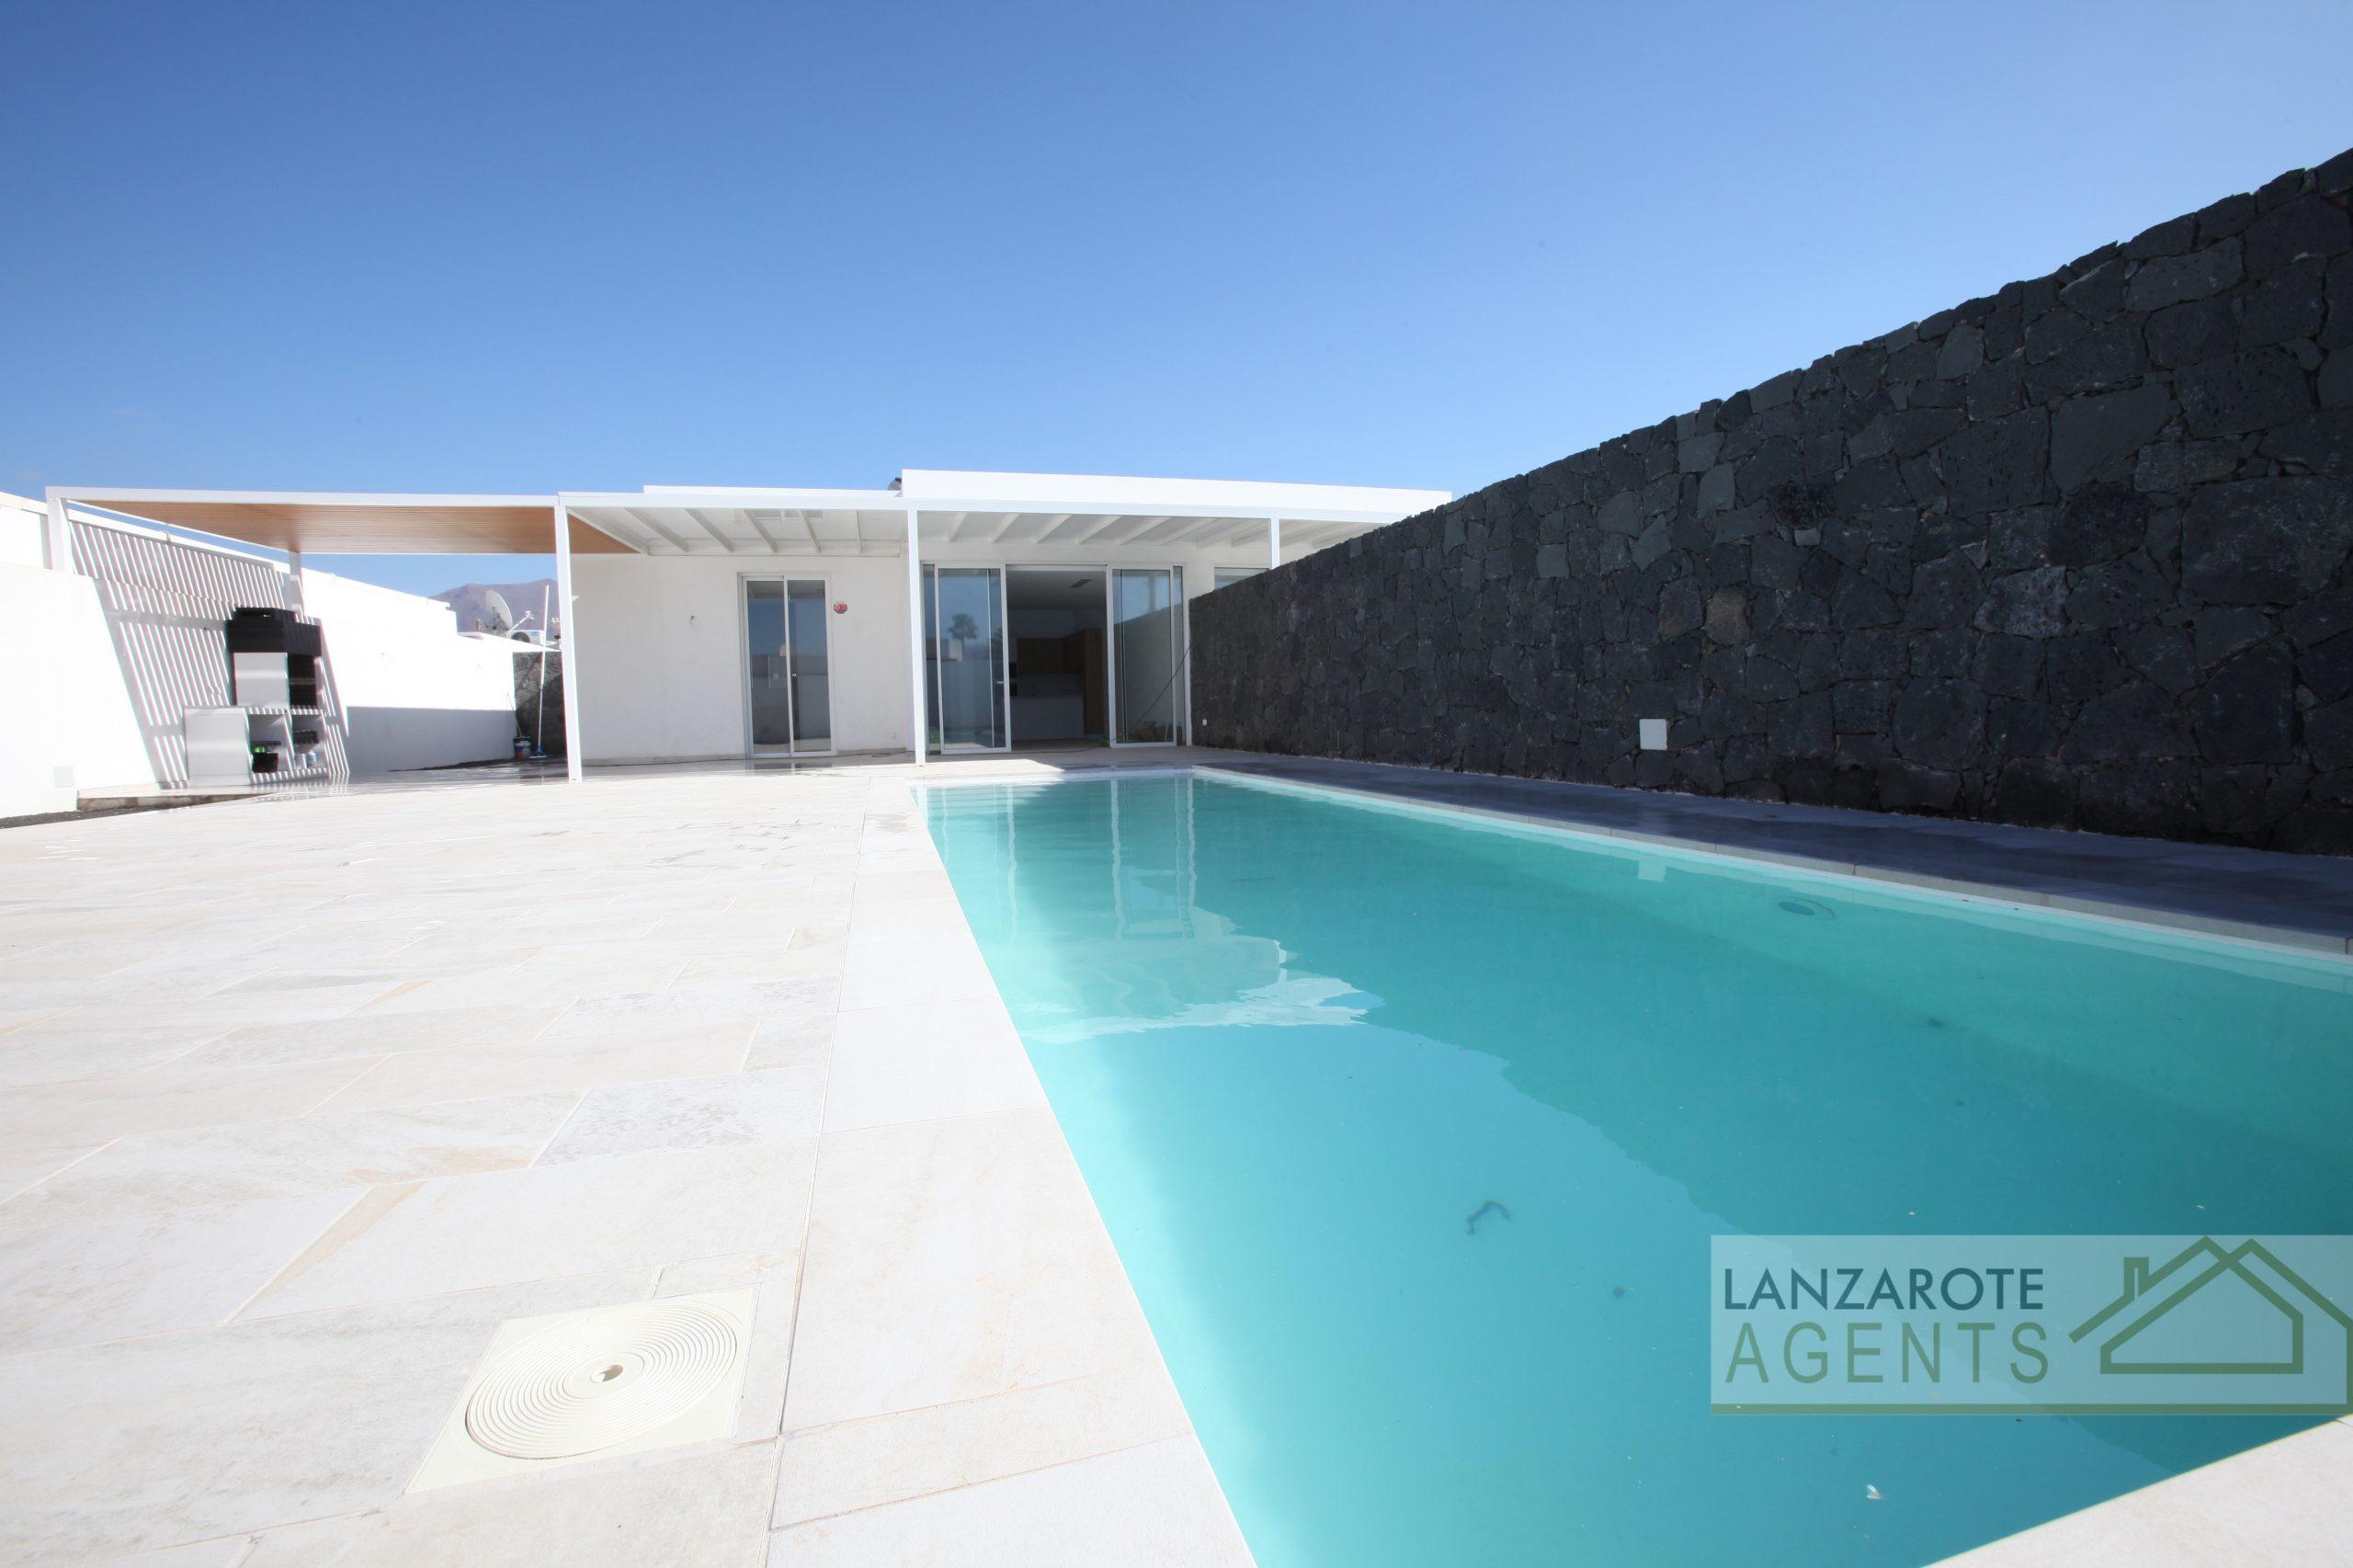 New Built 3 Bedroom Villa with High Standards, Central A/C and 9m Heated Pool